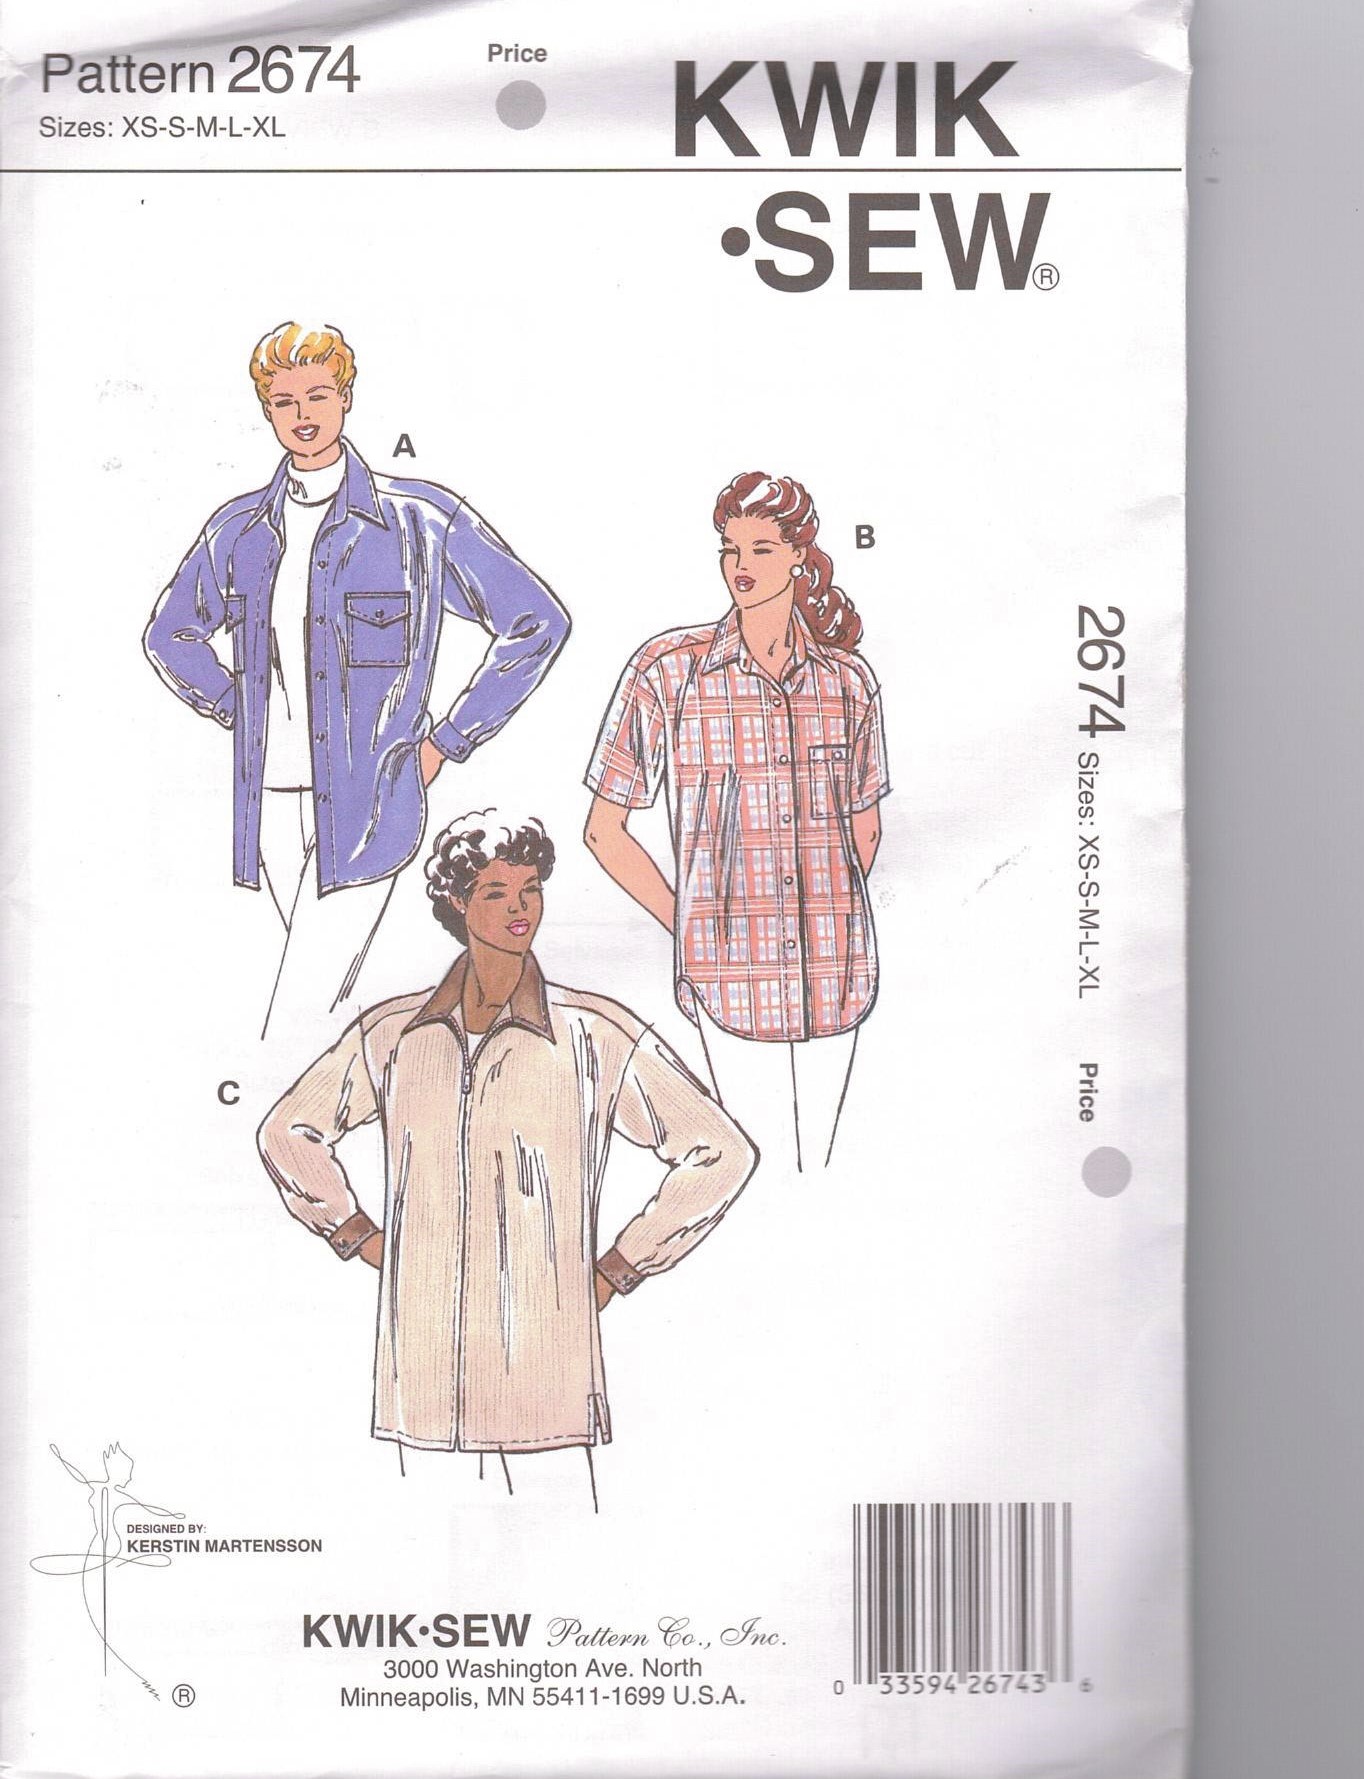 Kwik Sew Pattern 3896 Misses Blouse Tops in two views sizes XS